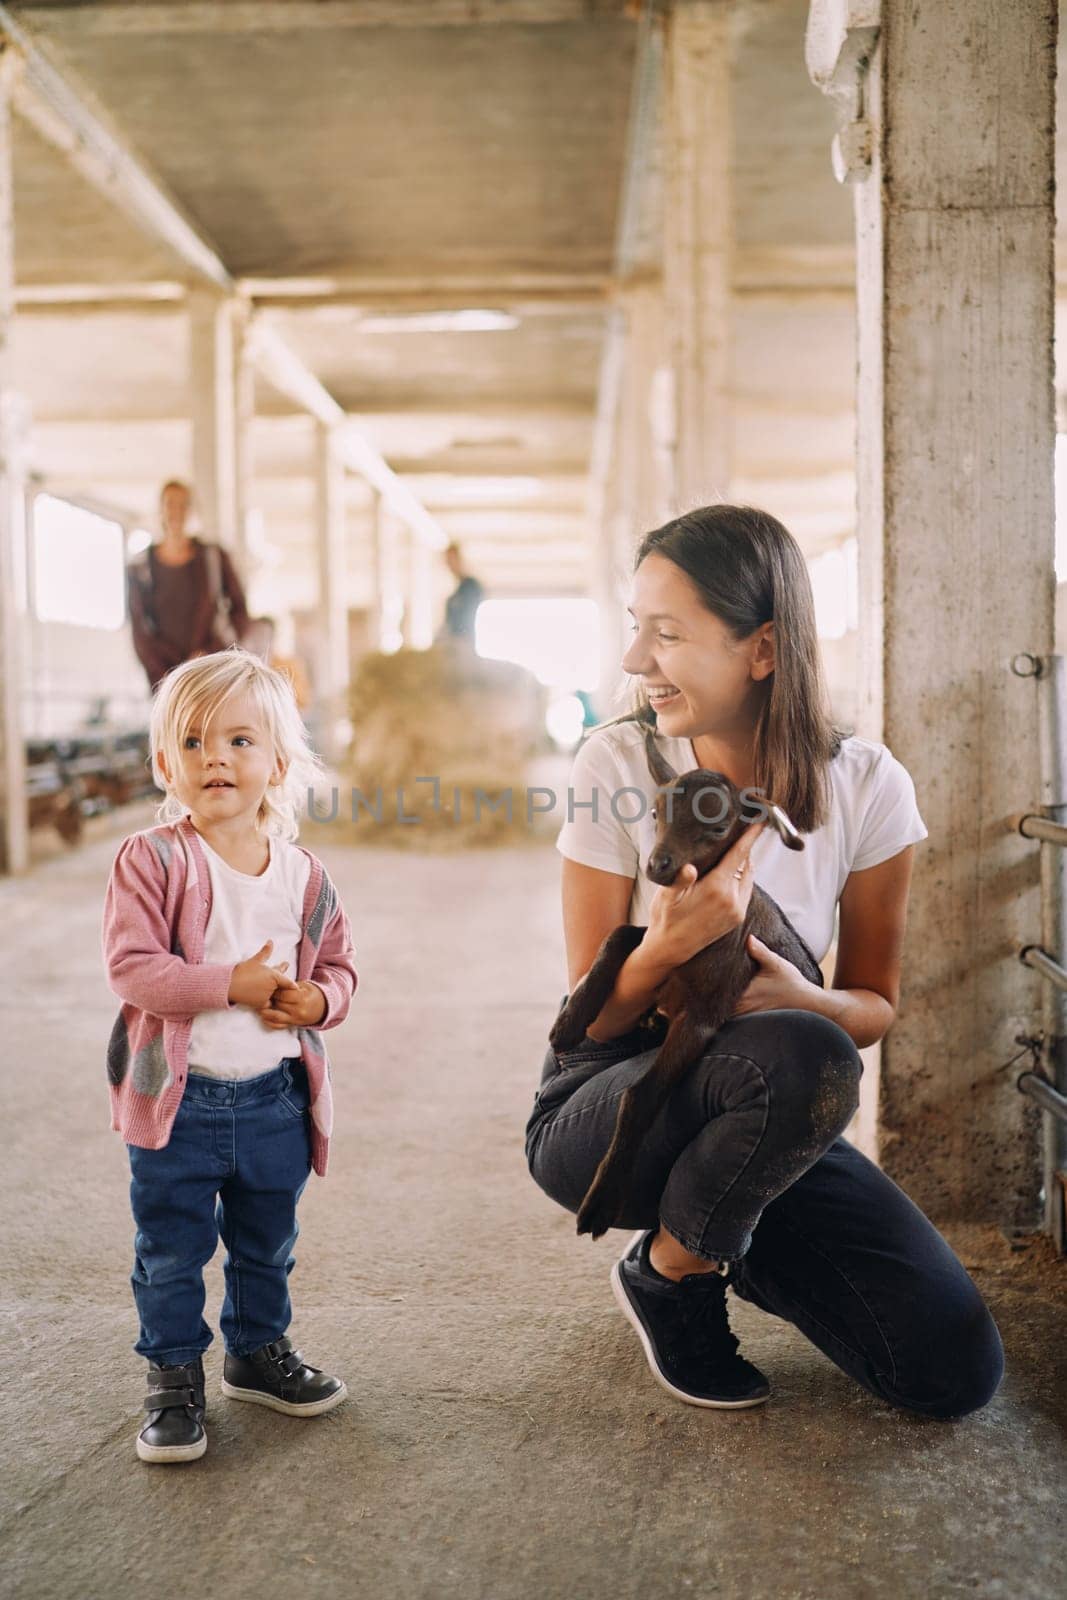 Squatting mother with a goatling in her arms looks at a little girl standing nearby by Nadtochiy